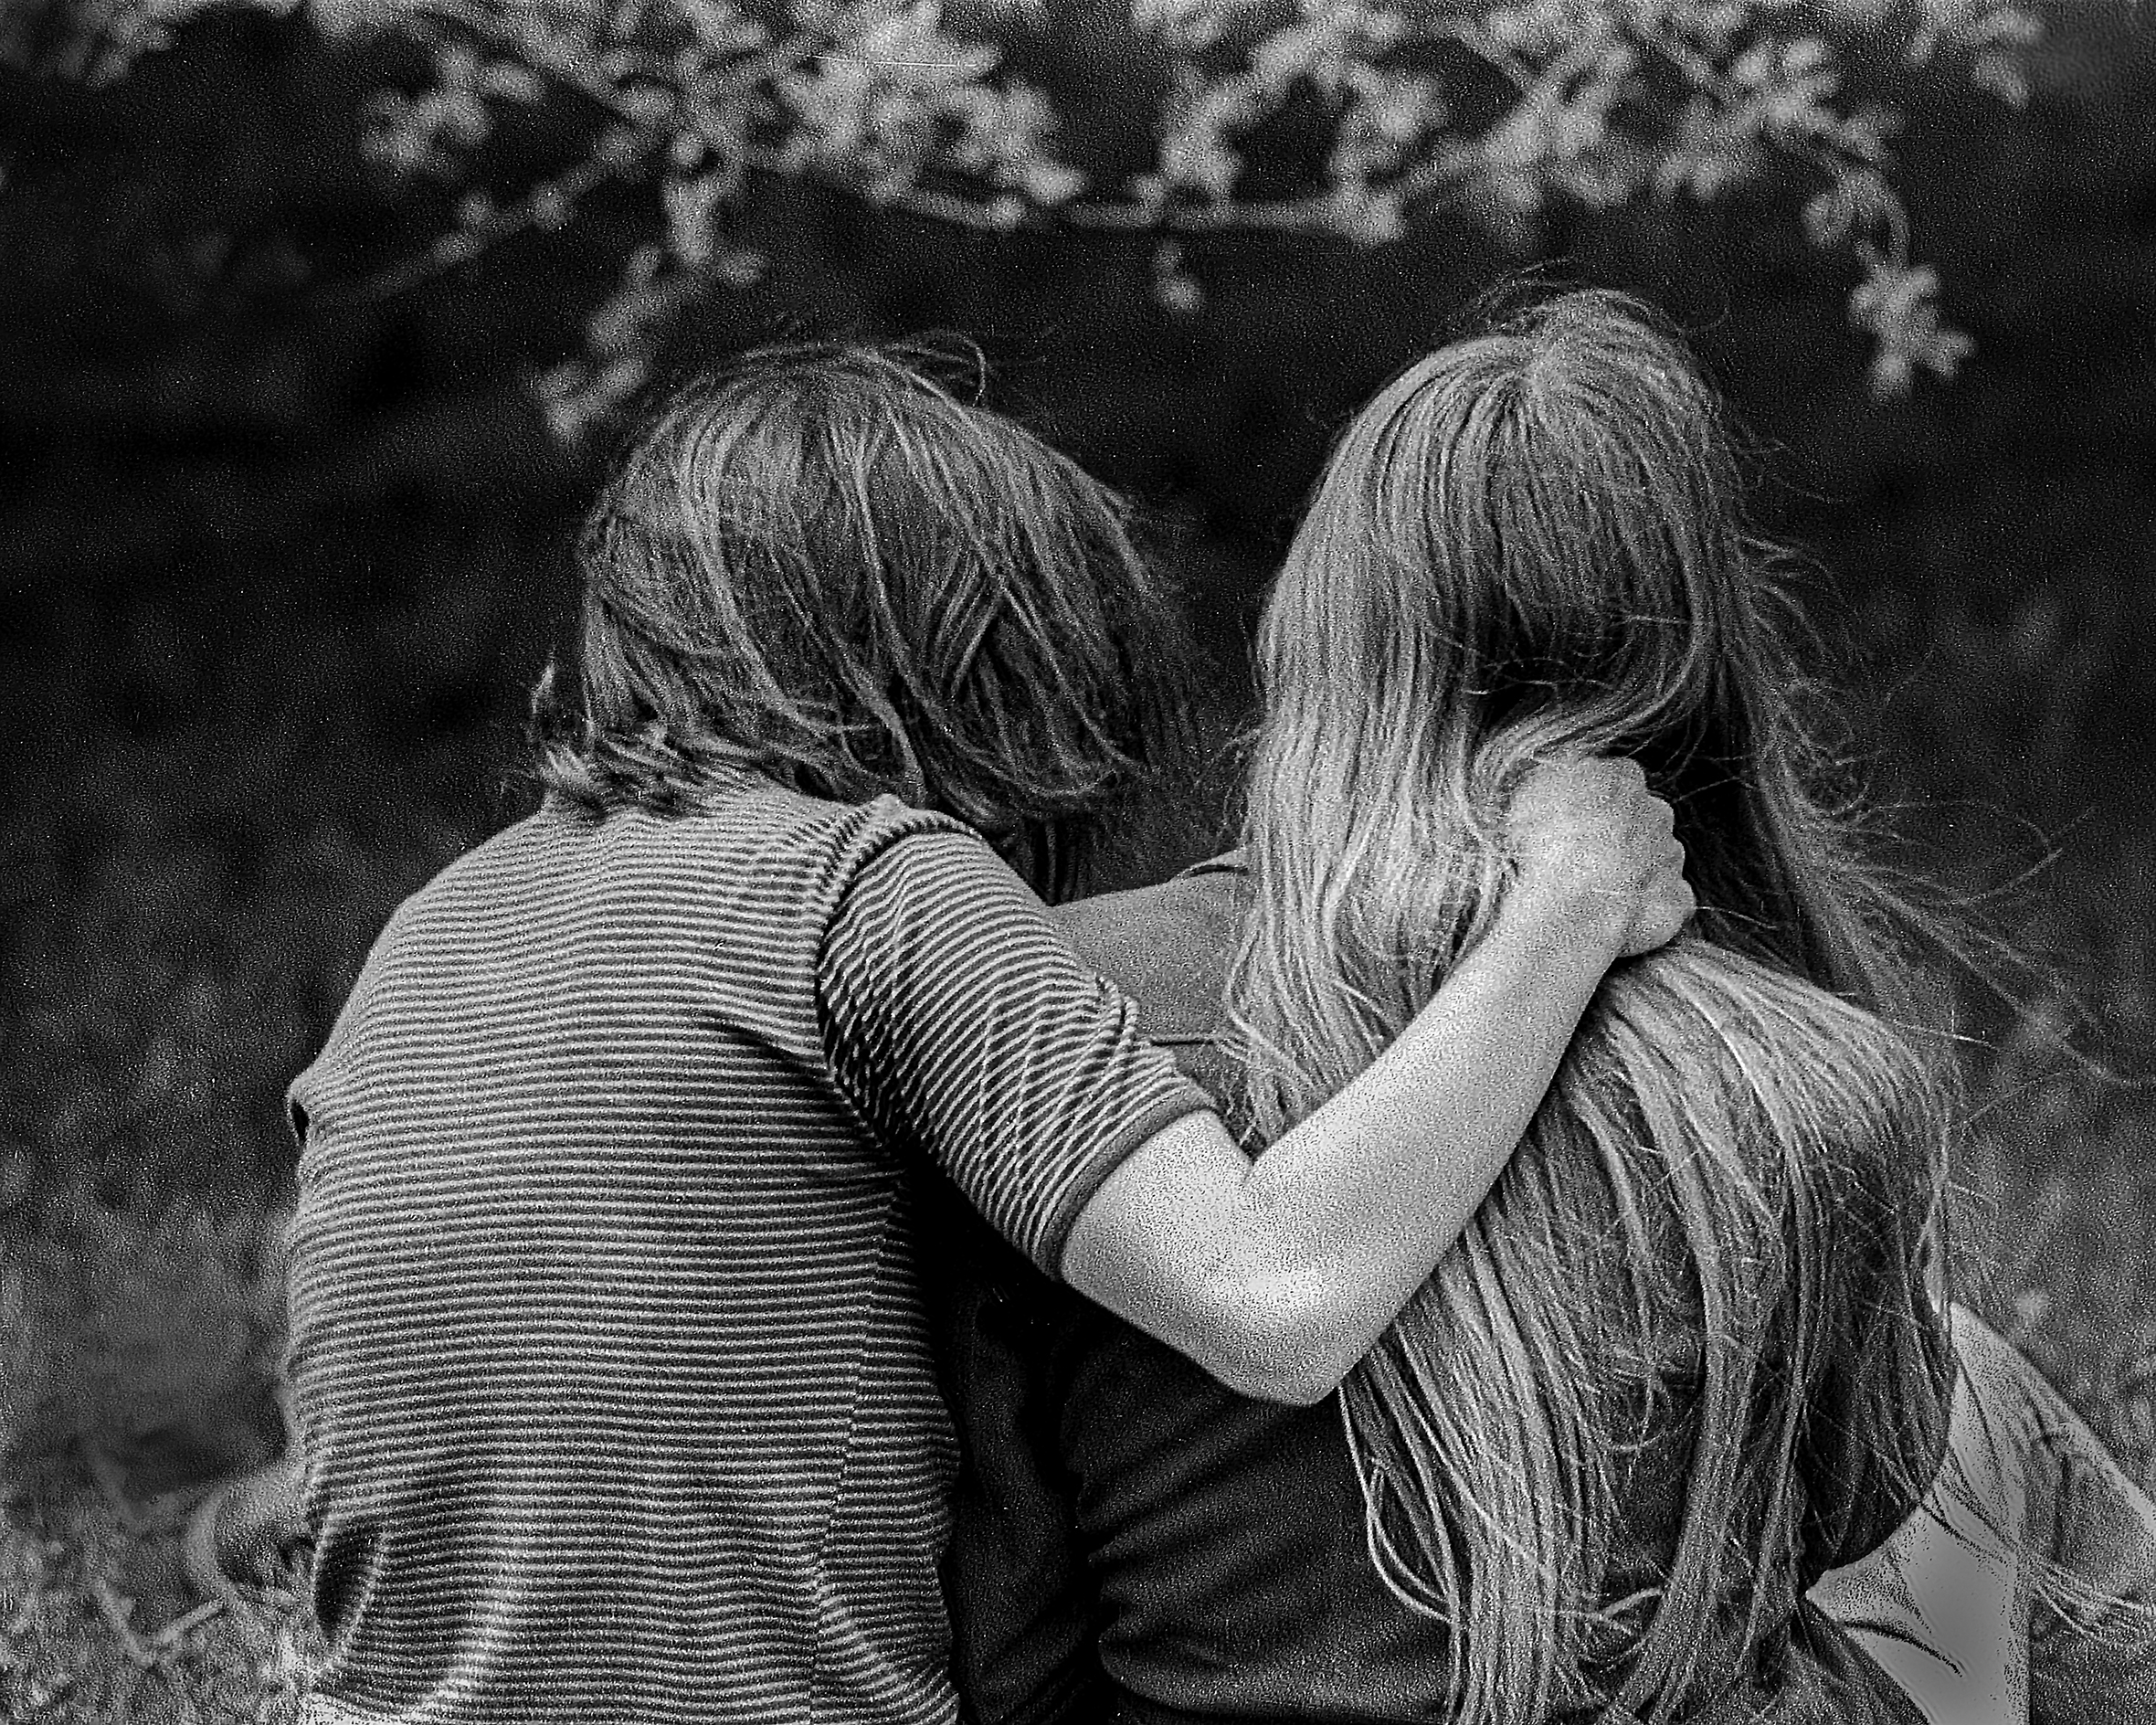 A teenage boy and girl sit next to each other on the grass, and the boy has his arm around the girl’s shoulder. They are shown from the back. He has straight, shoulder-length hair and she has straight, waist-length hair.